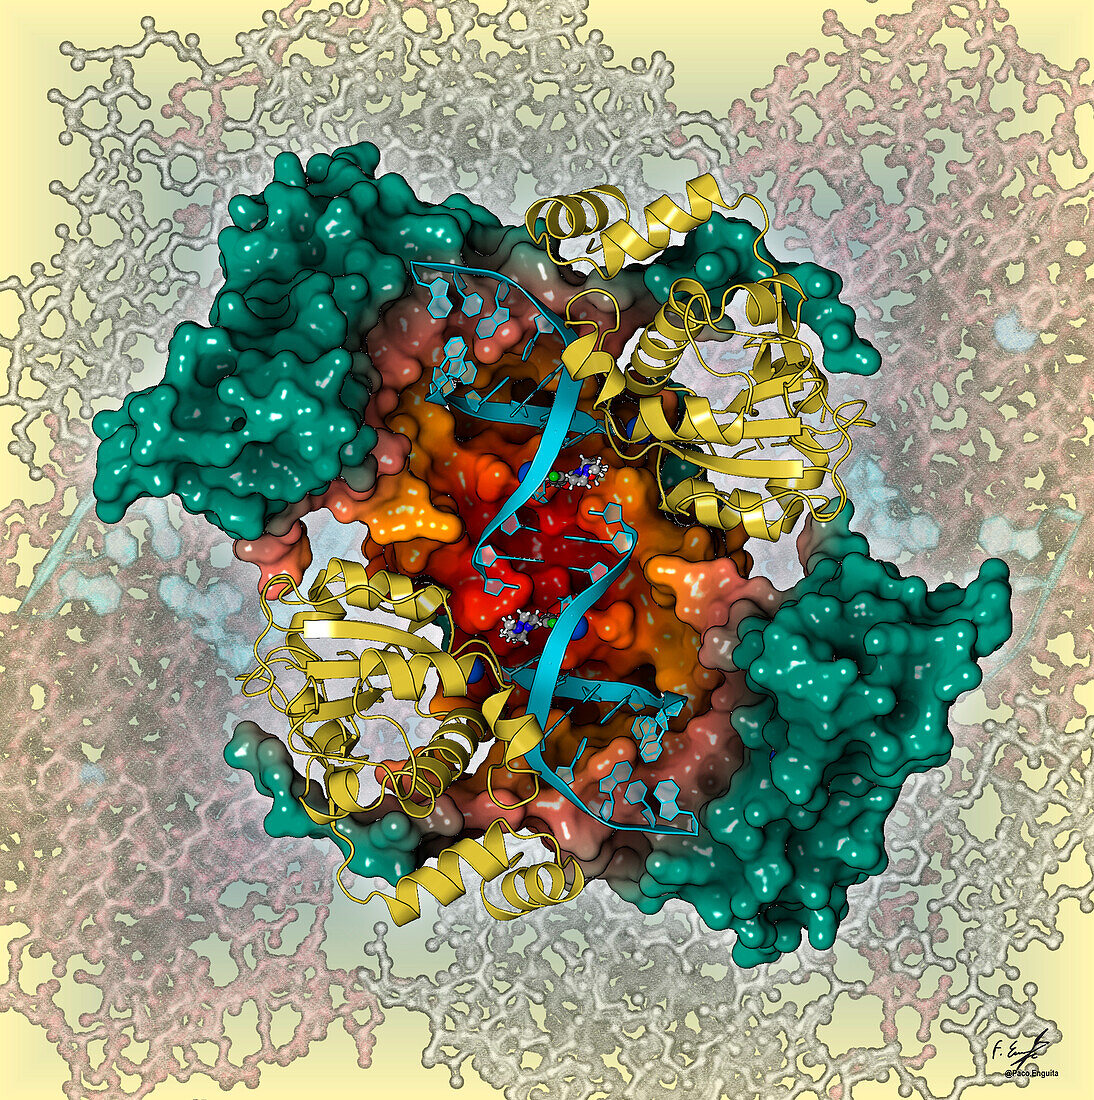 Antibiotic complexed with topoisomerase IV, illustration